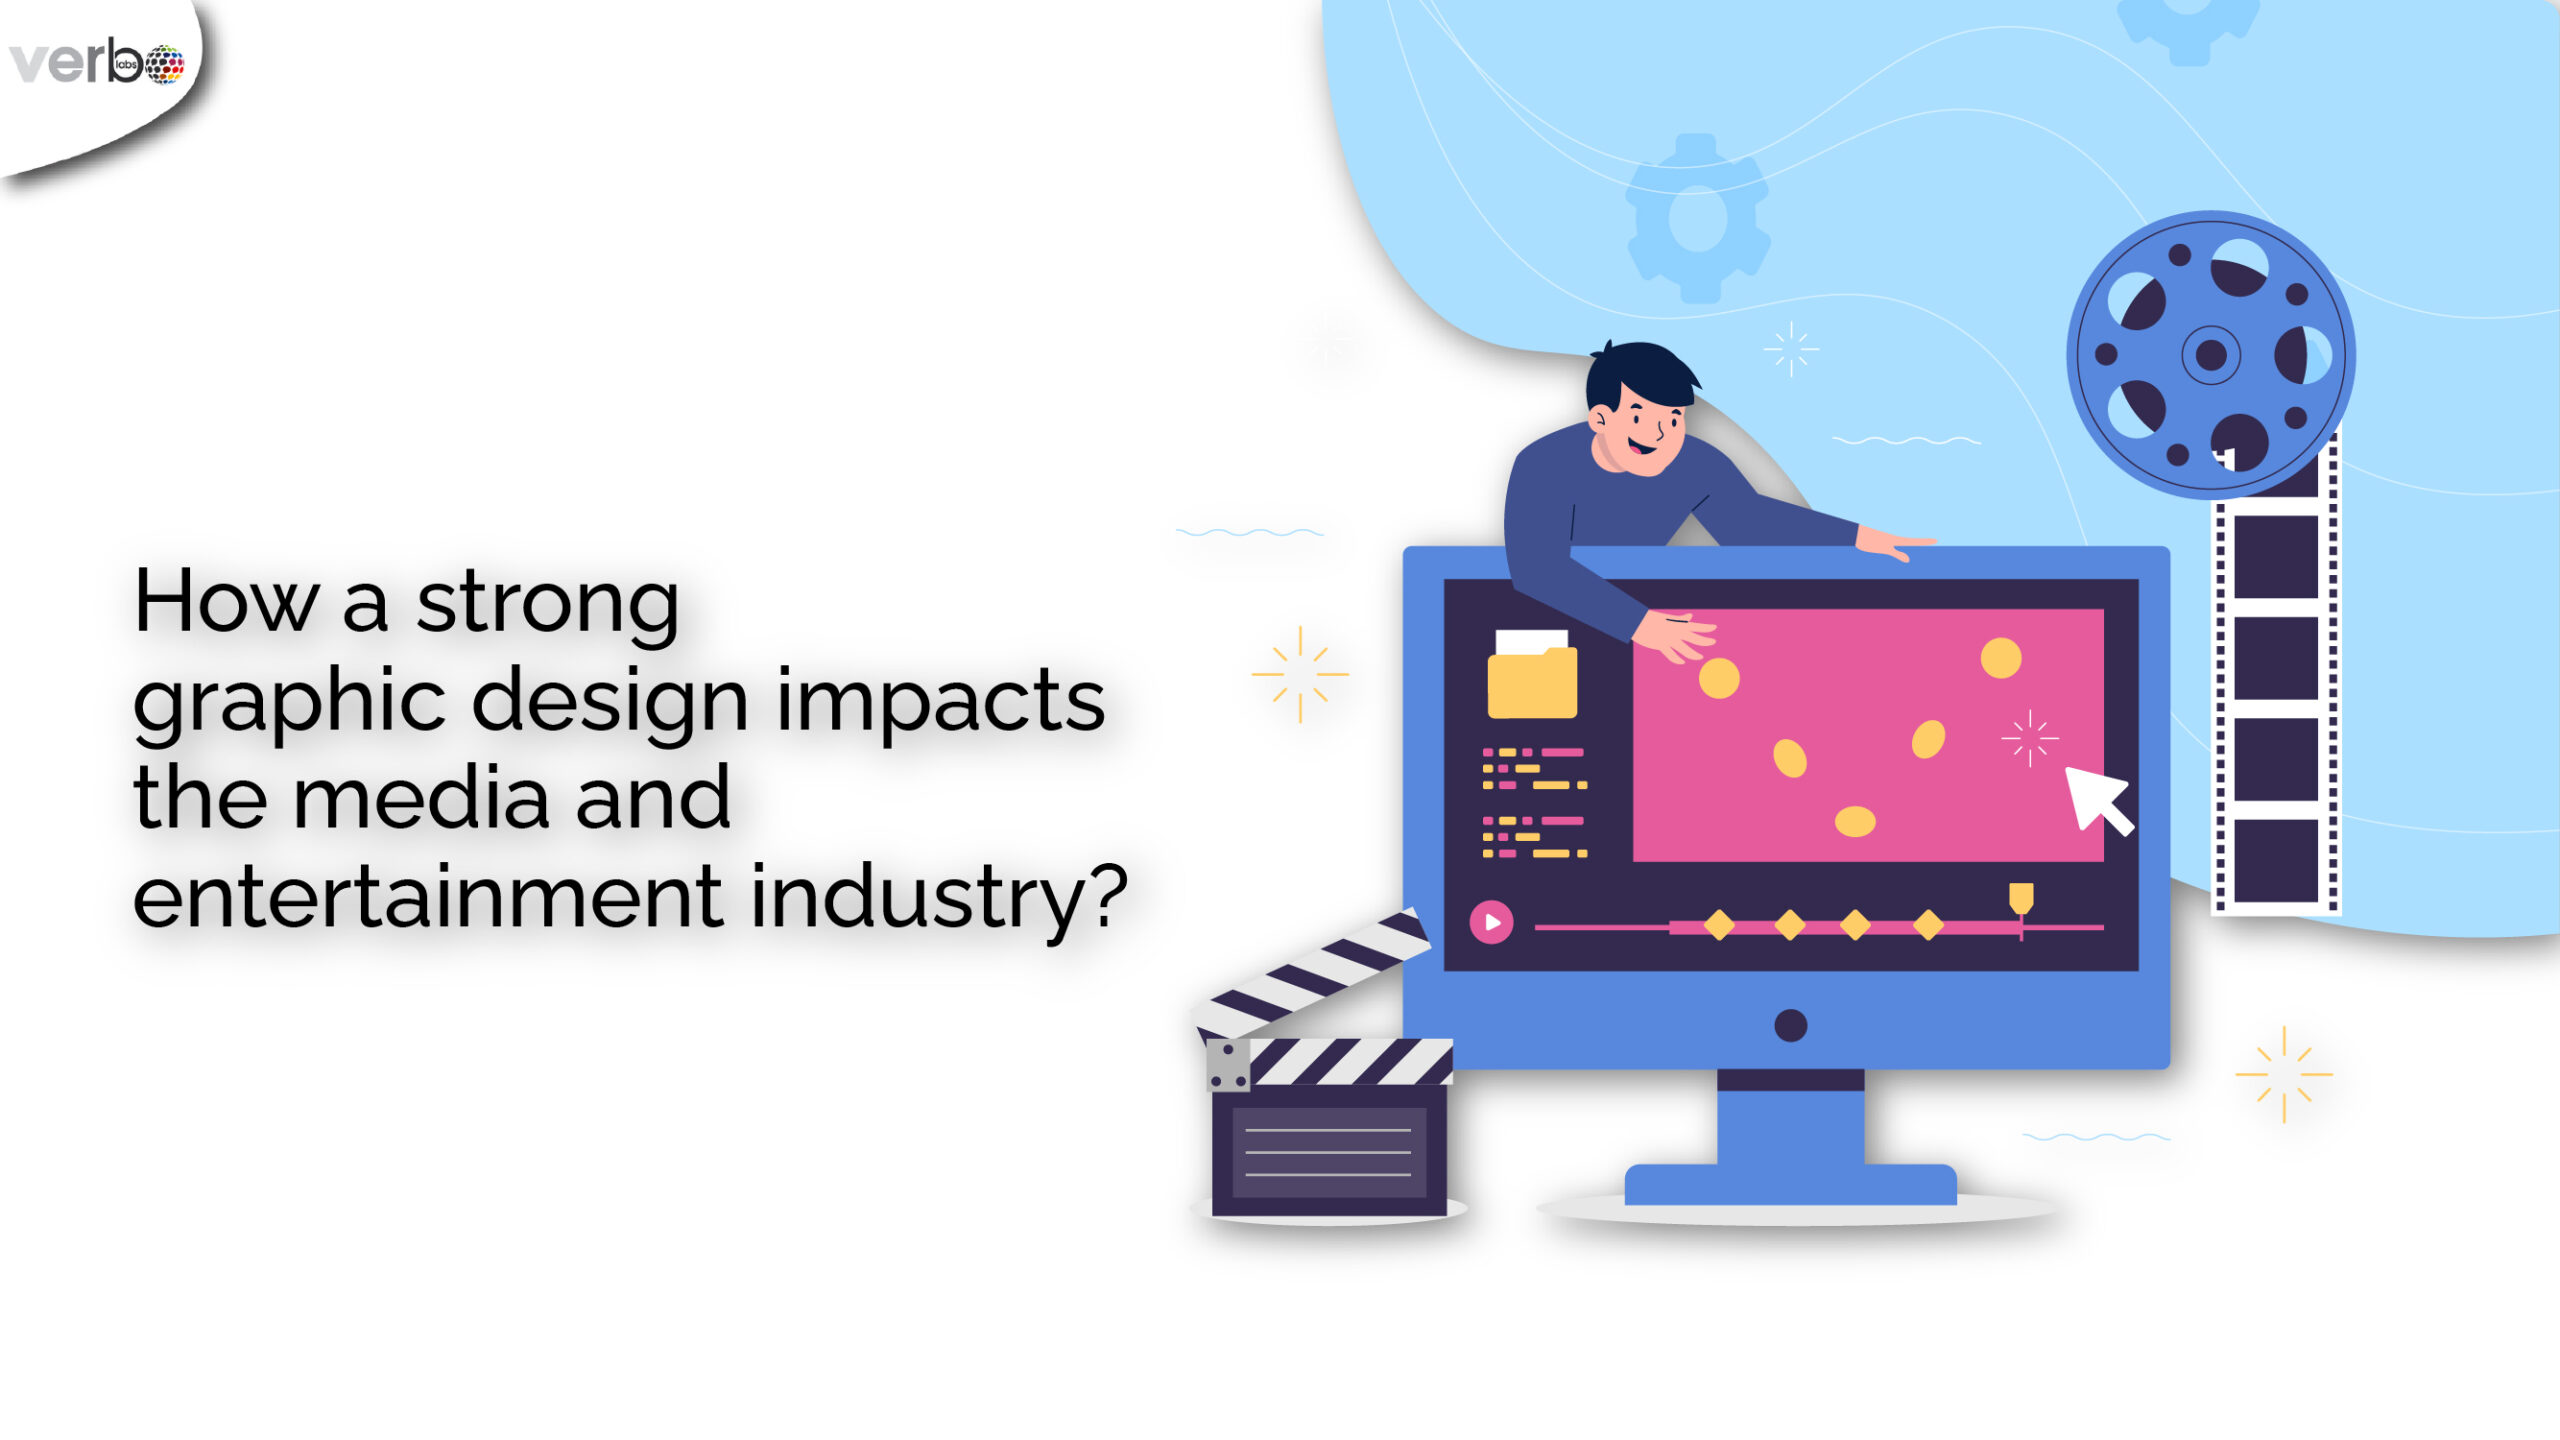 How a strong graphic design impacts the media and entertainment industry?